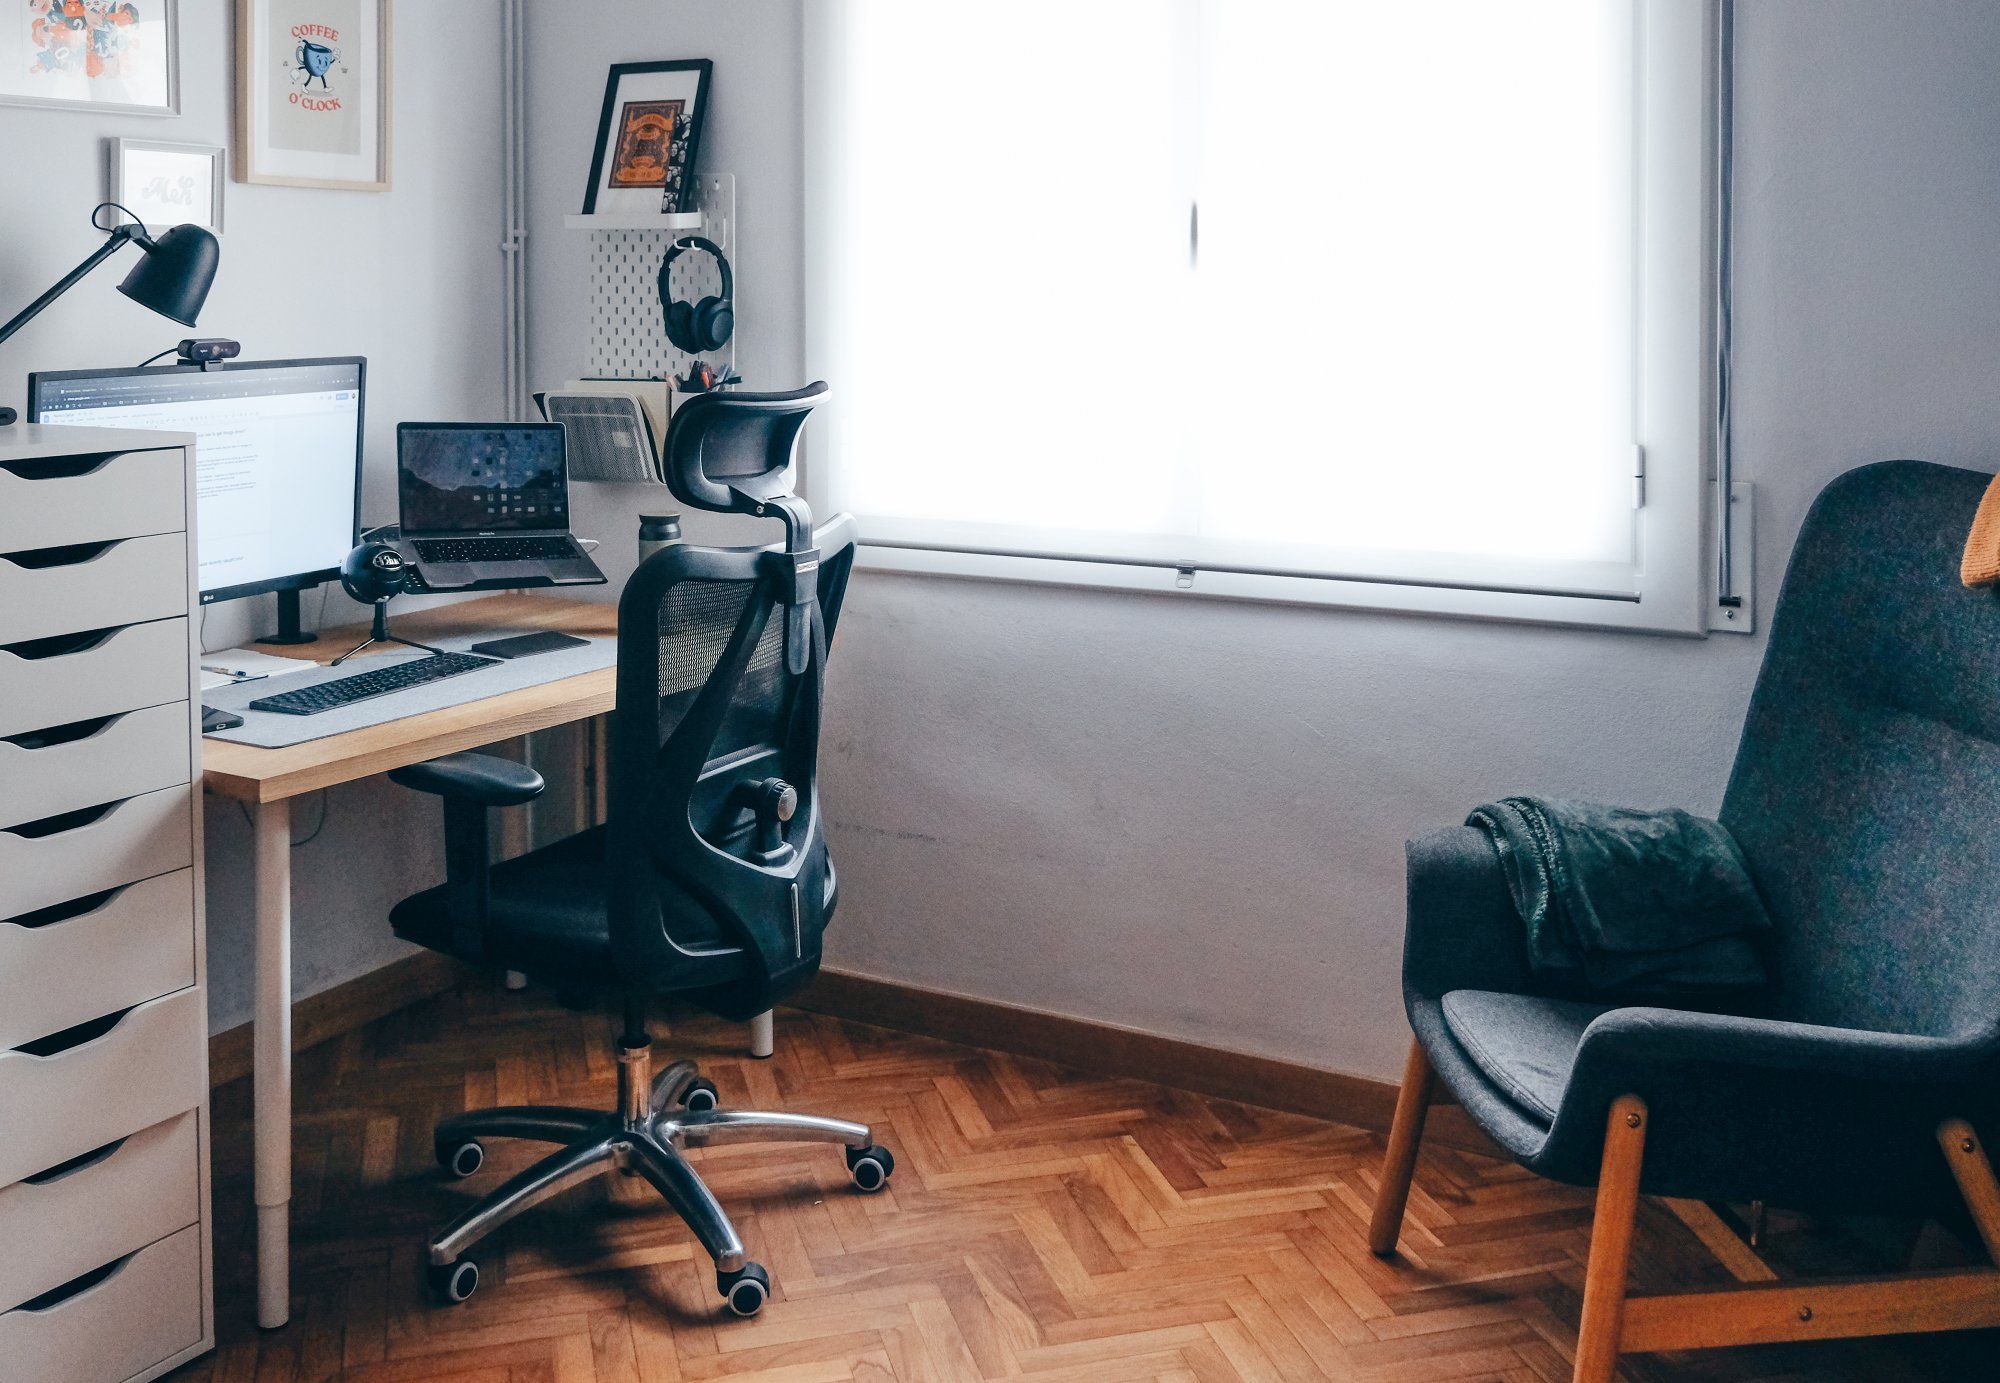 A minimalist home office with a light wood desk, ergonomic office chair, laptop with external monitor, pegboard with headphones, and a comfortable armchair with a throw blanket